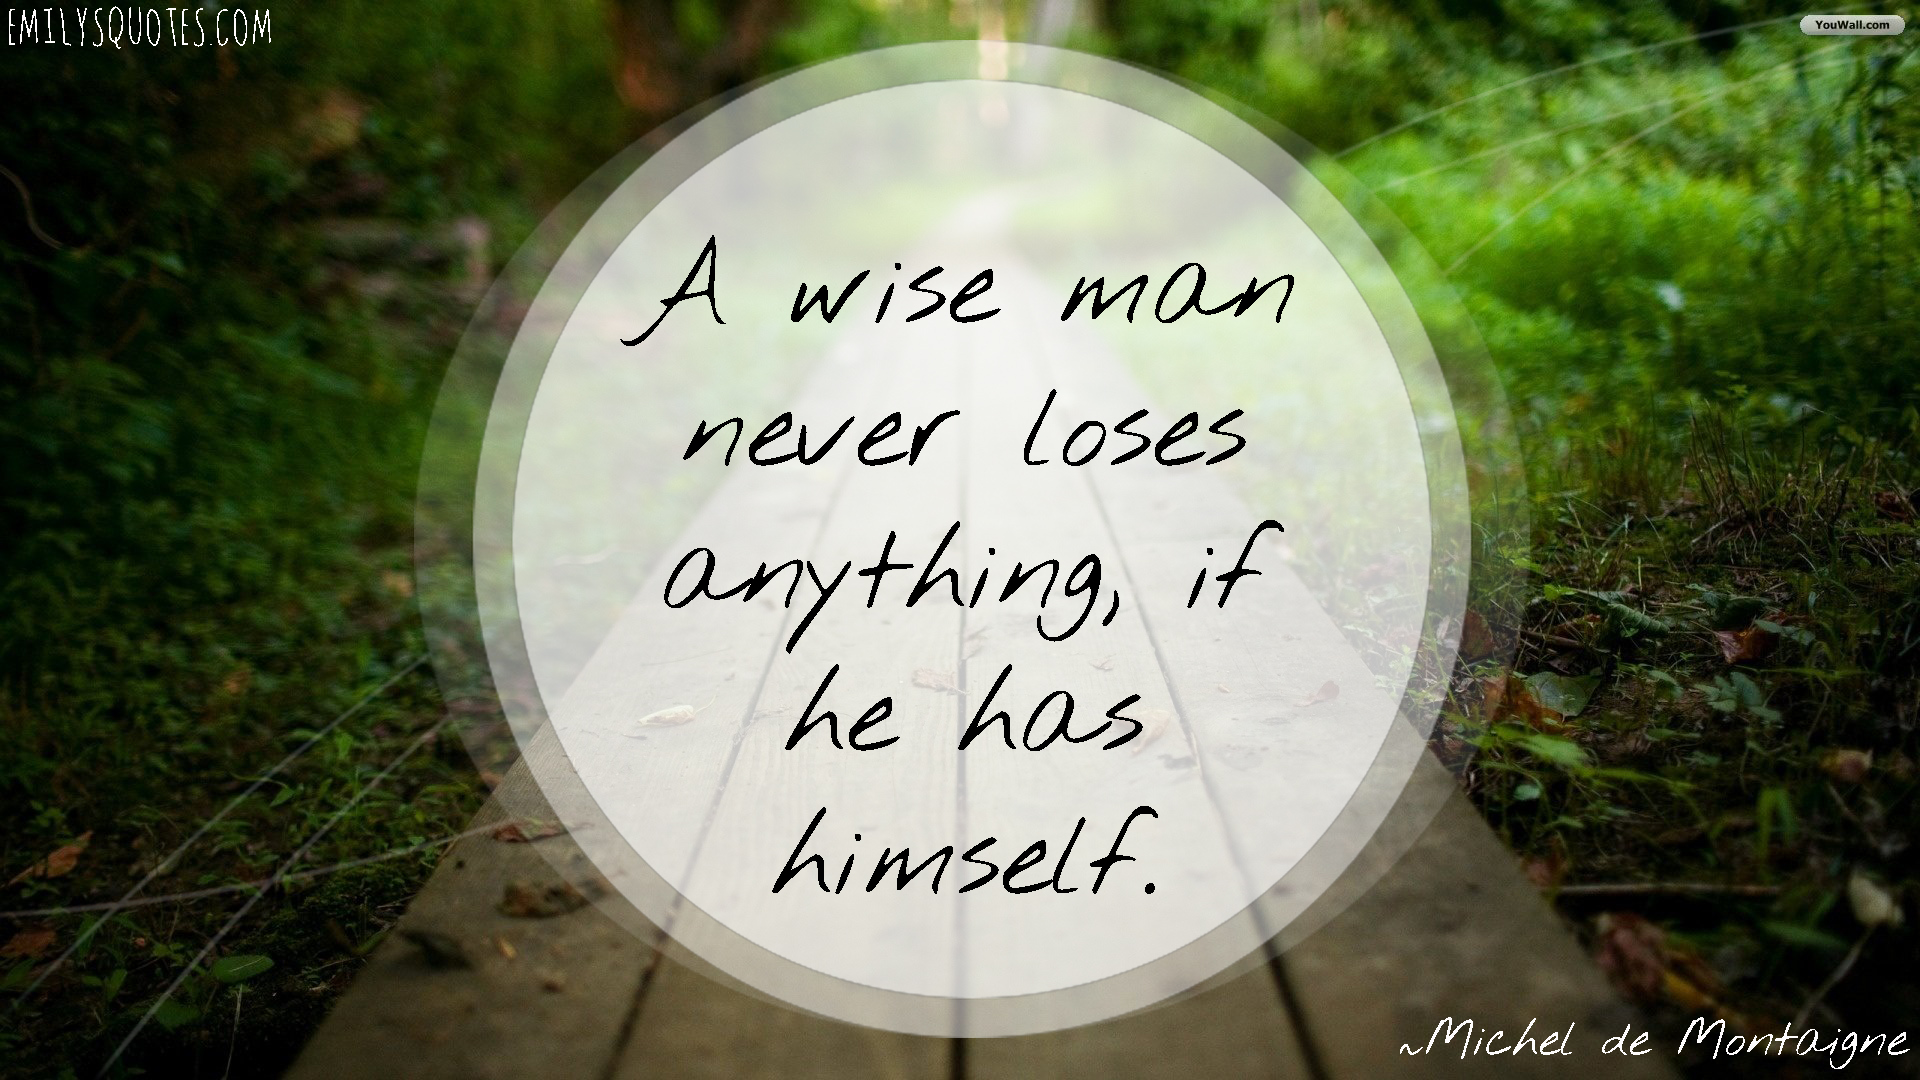 A wise man never loses anything, if he has himself